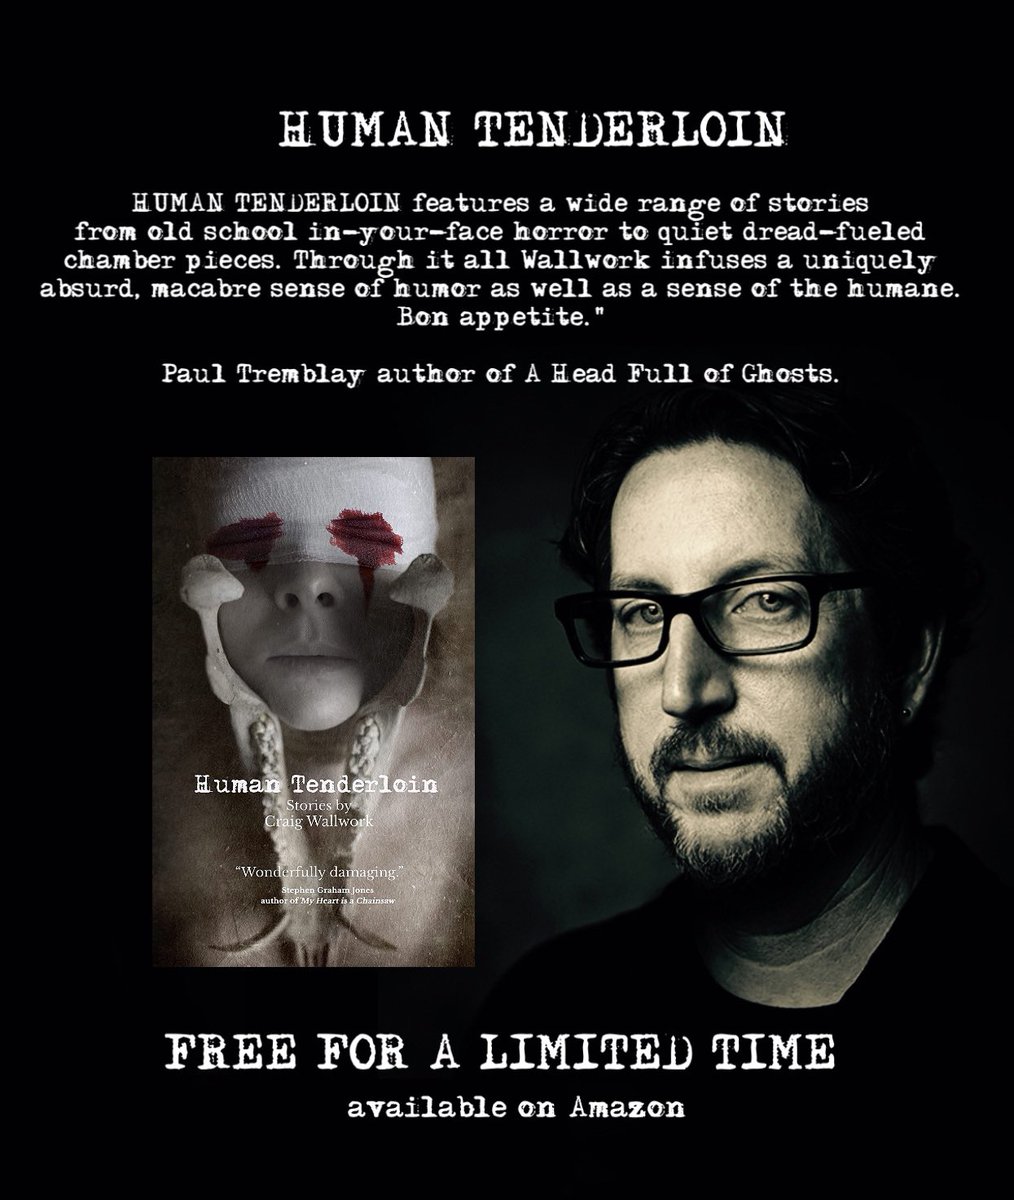 One final push. Last day to grab a FREE copy of Human Tenderloin: A Collection of Horror Stories amzn.eu/d/3Demkkh